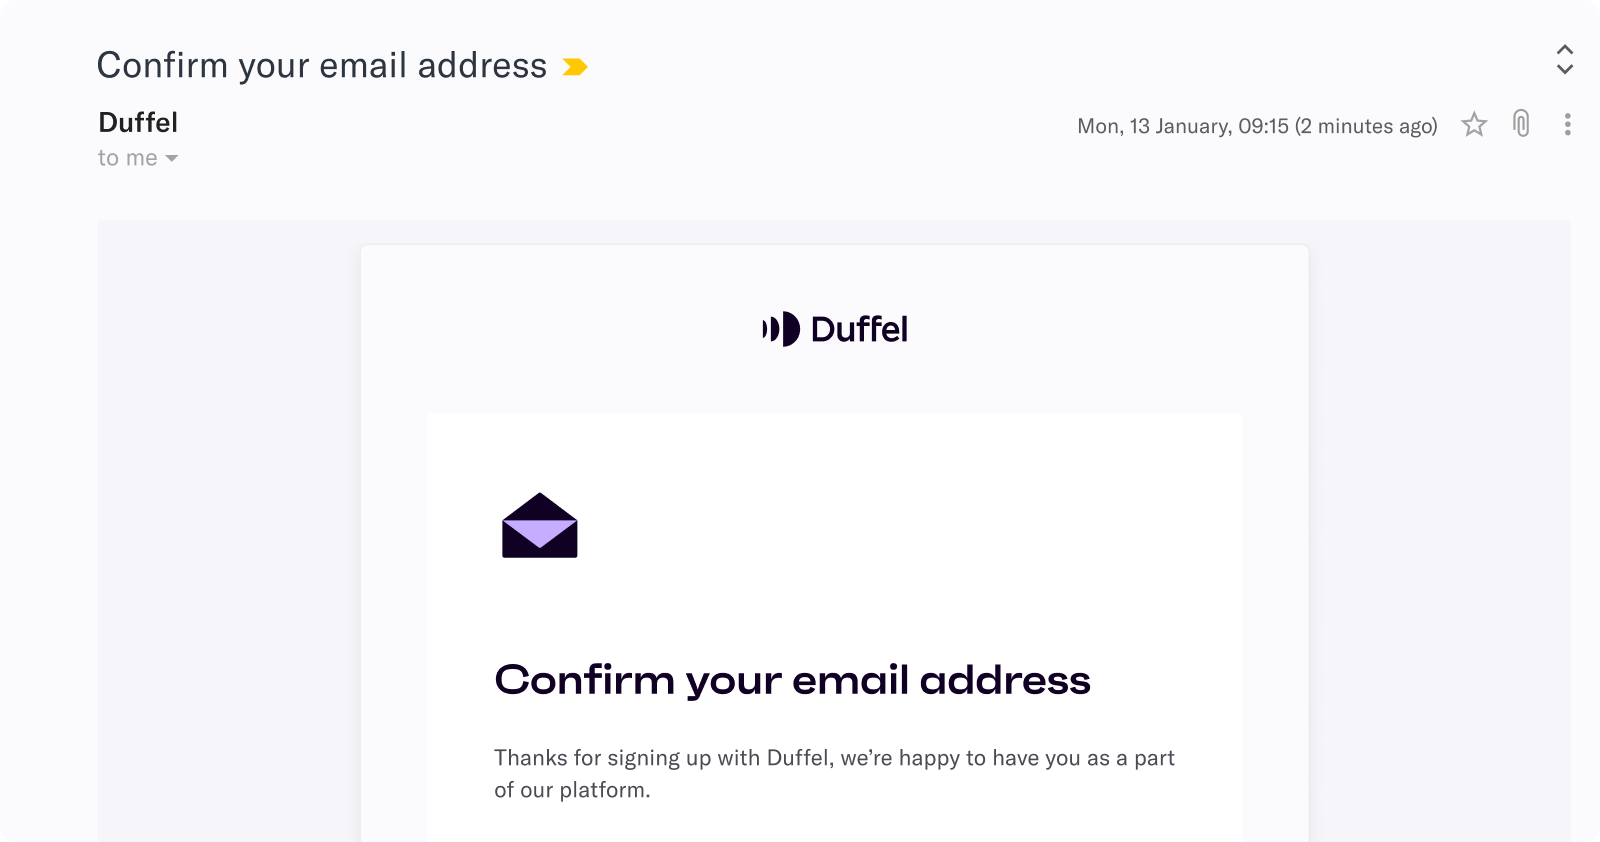 Partial screenshot of receiving a confirmation email from Duffel